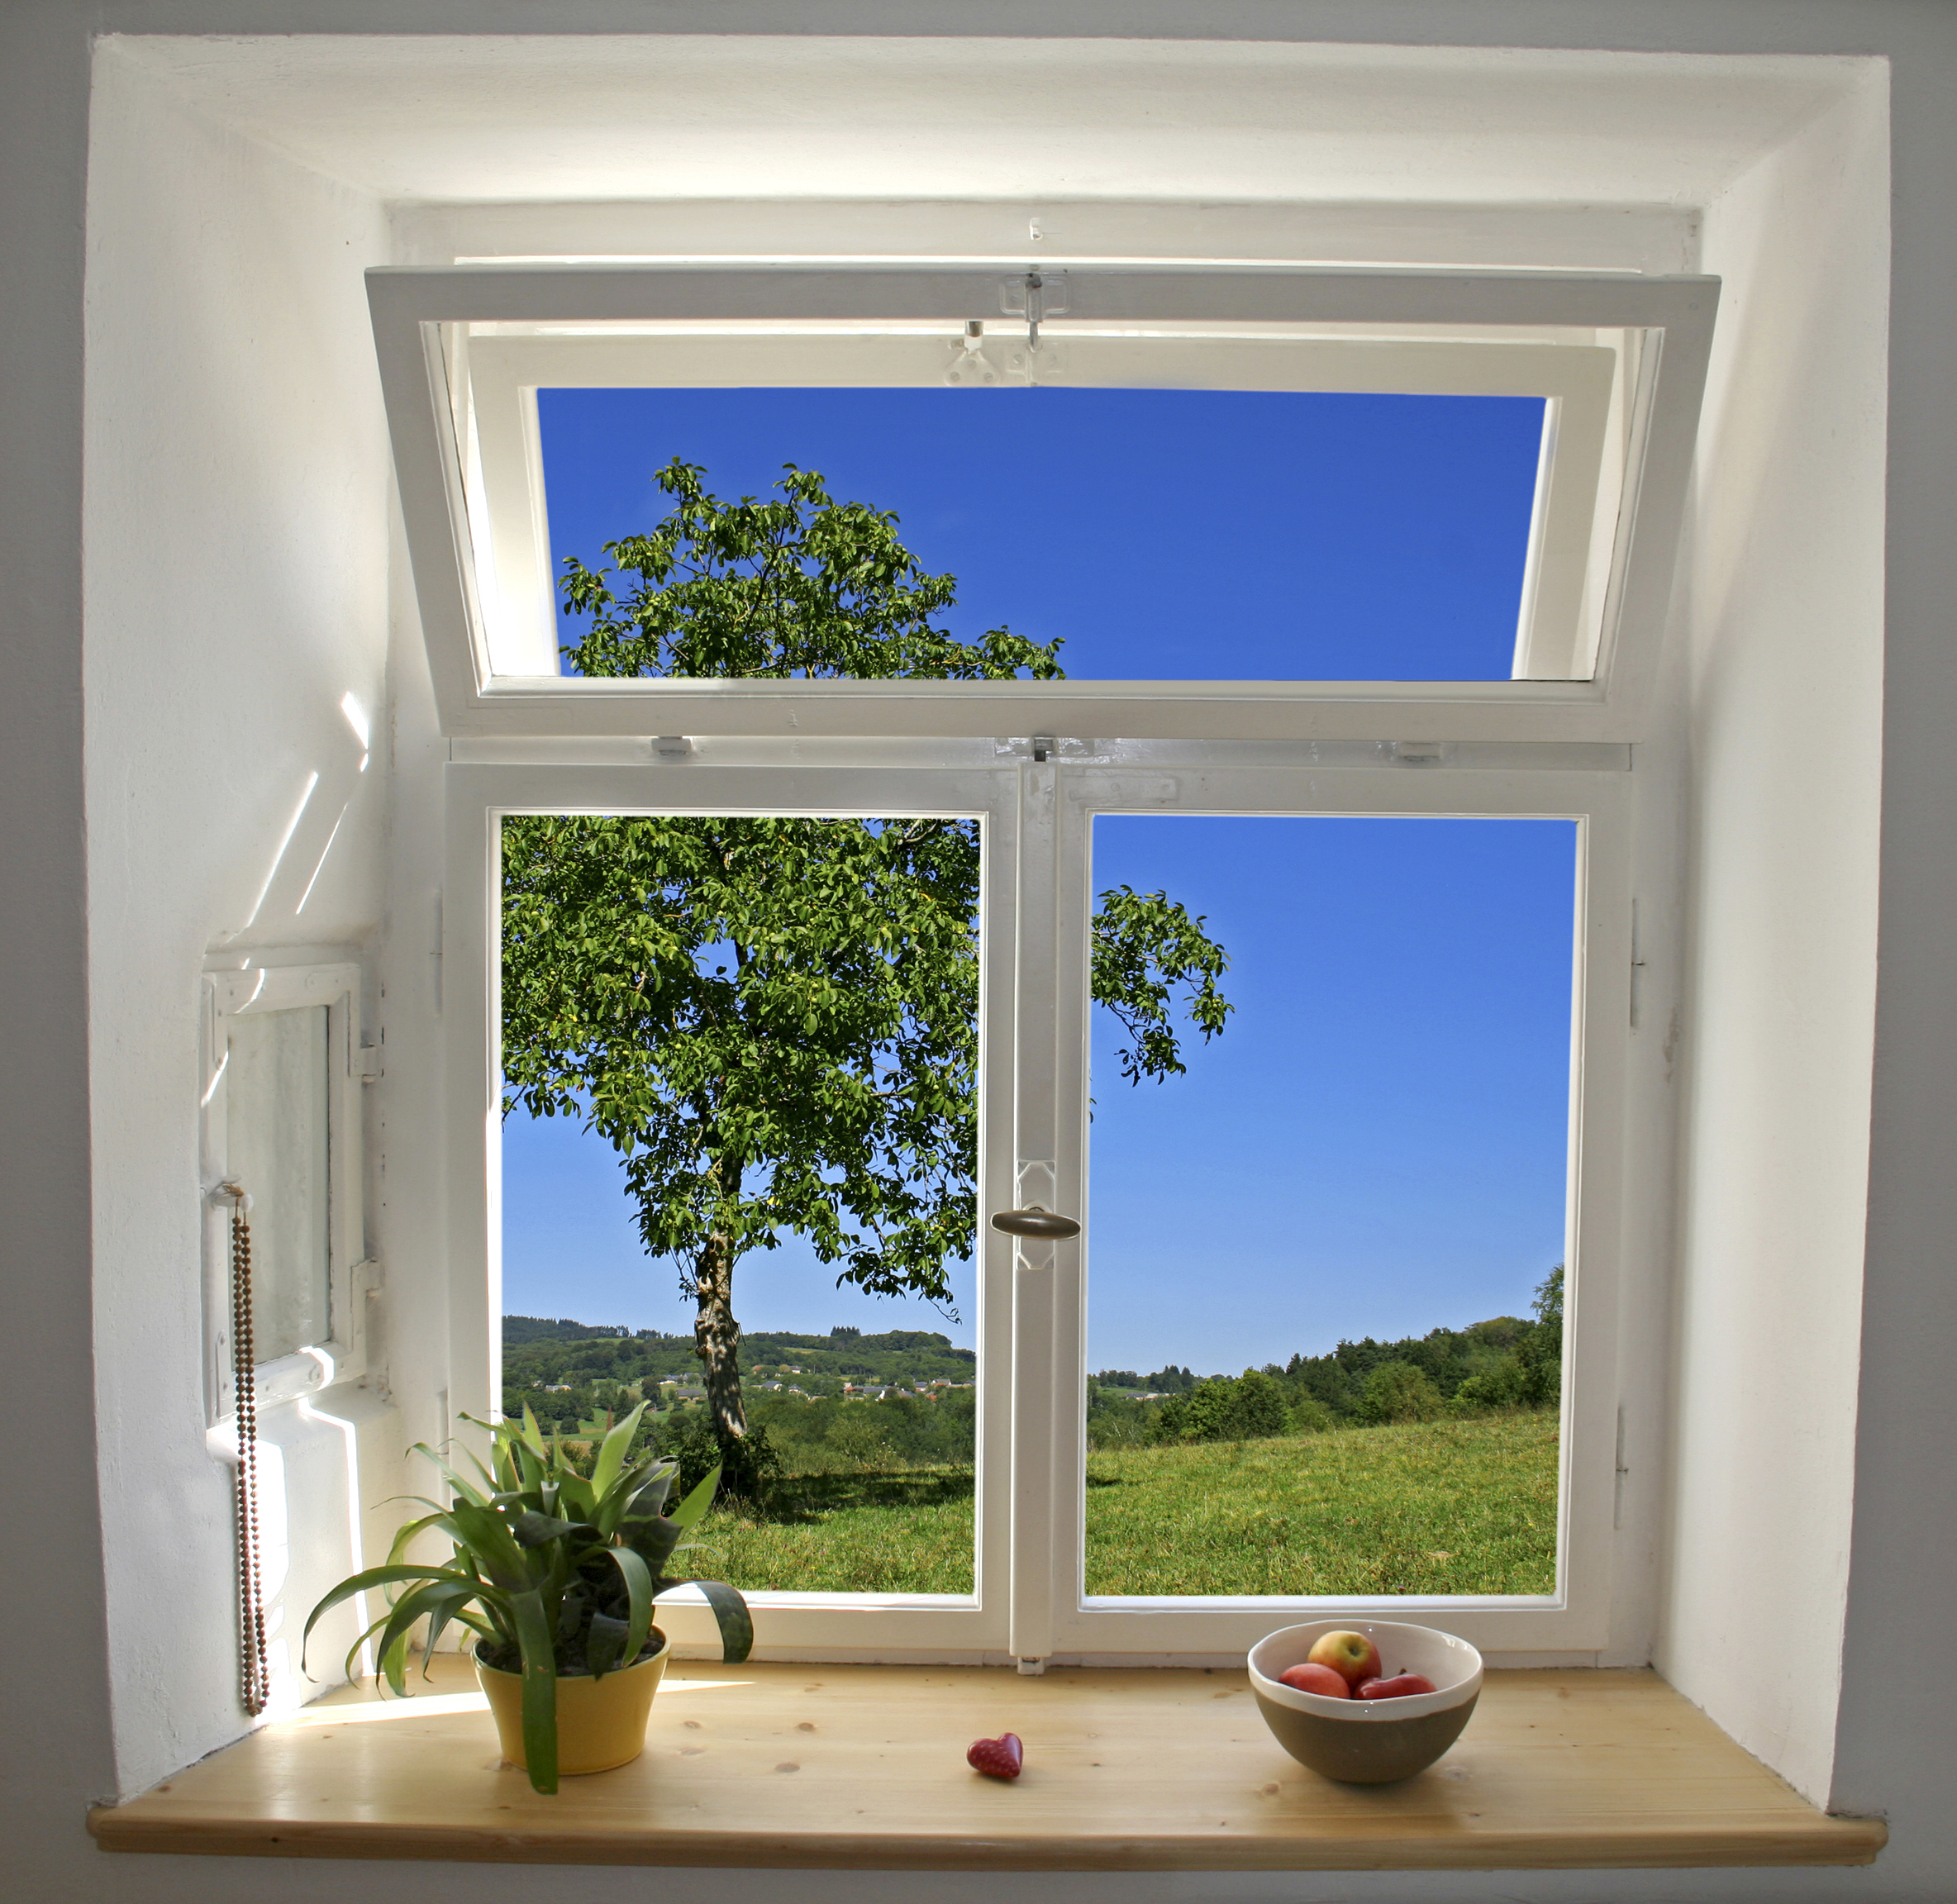 white wooden windows pane with apples and plant with outside view of tree and field